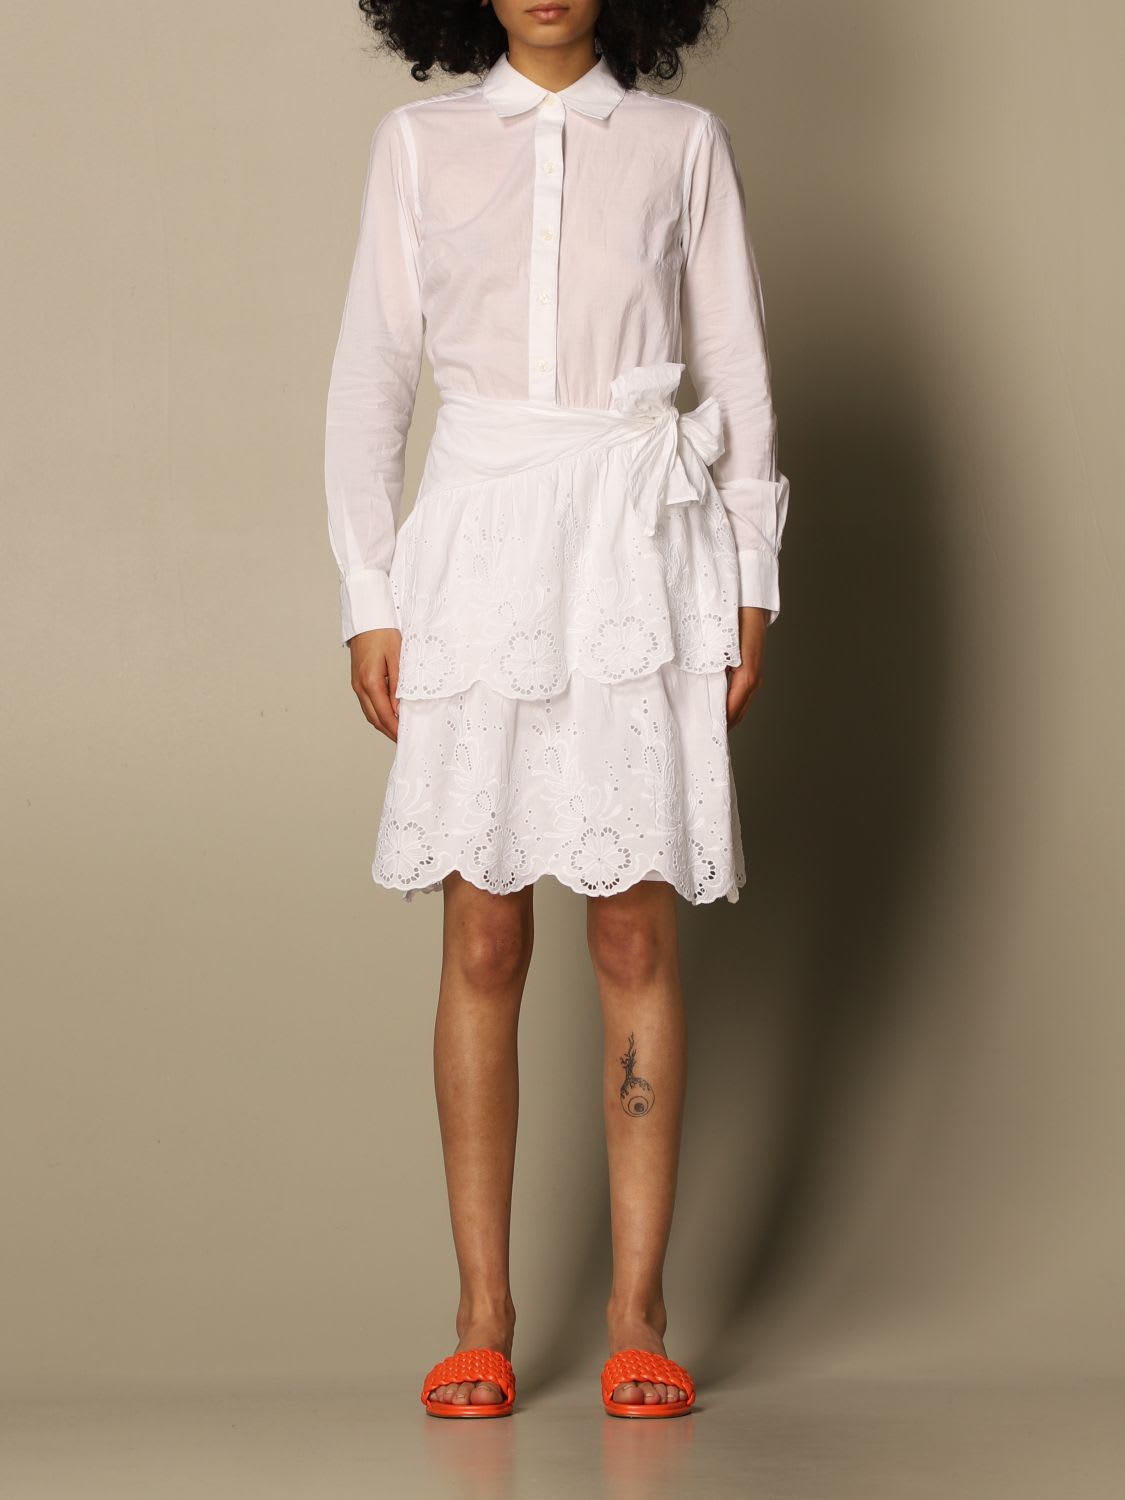 Lauren Ralph Lauren Dress Lauren Ralph Lauren Dress With Embroidery